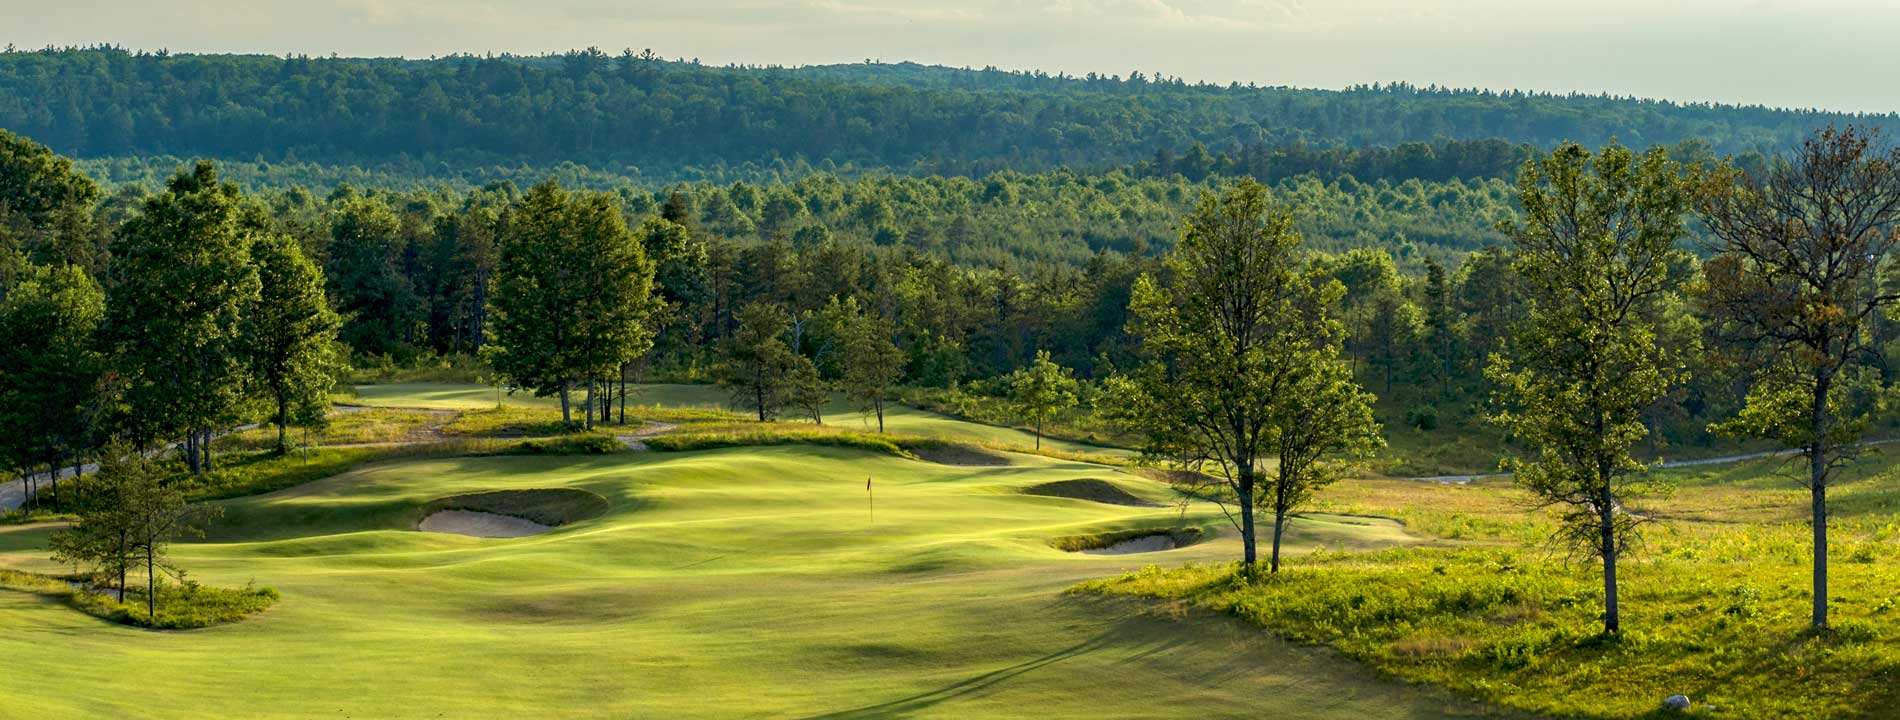 Forest Dunes' The Loop is one of only two reversible 18-hole courses in the U.S.